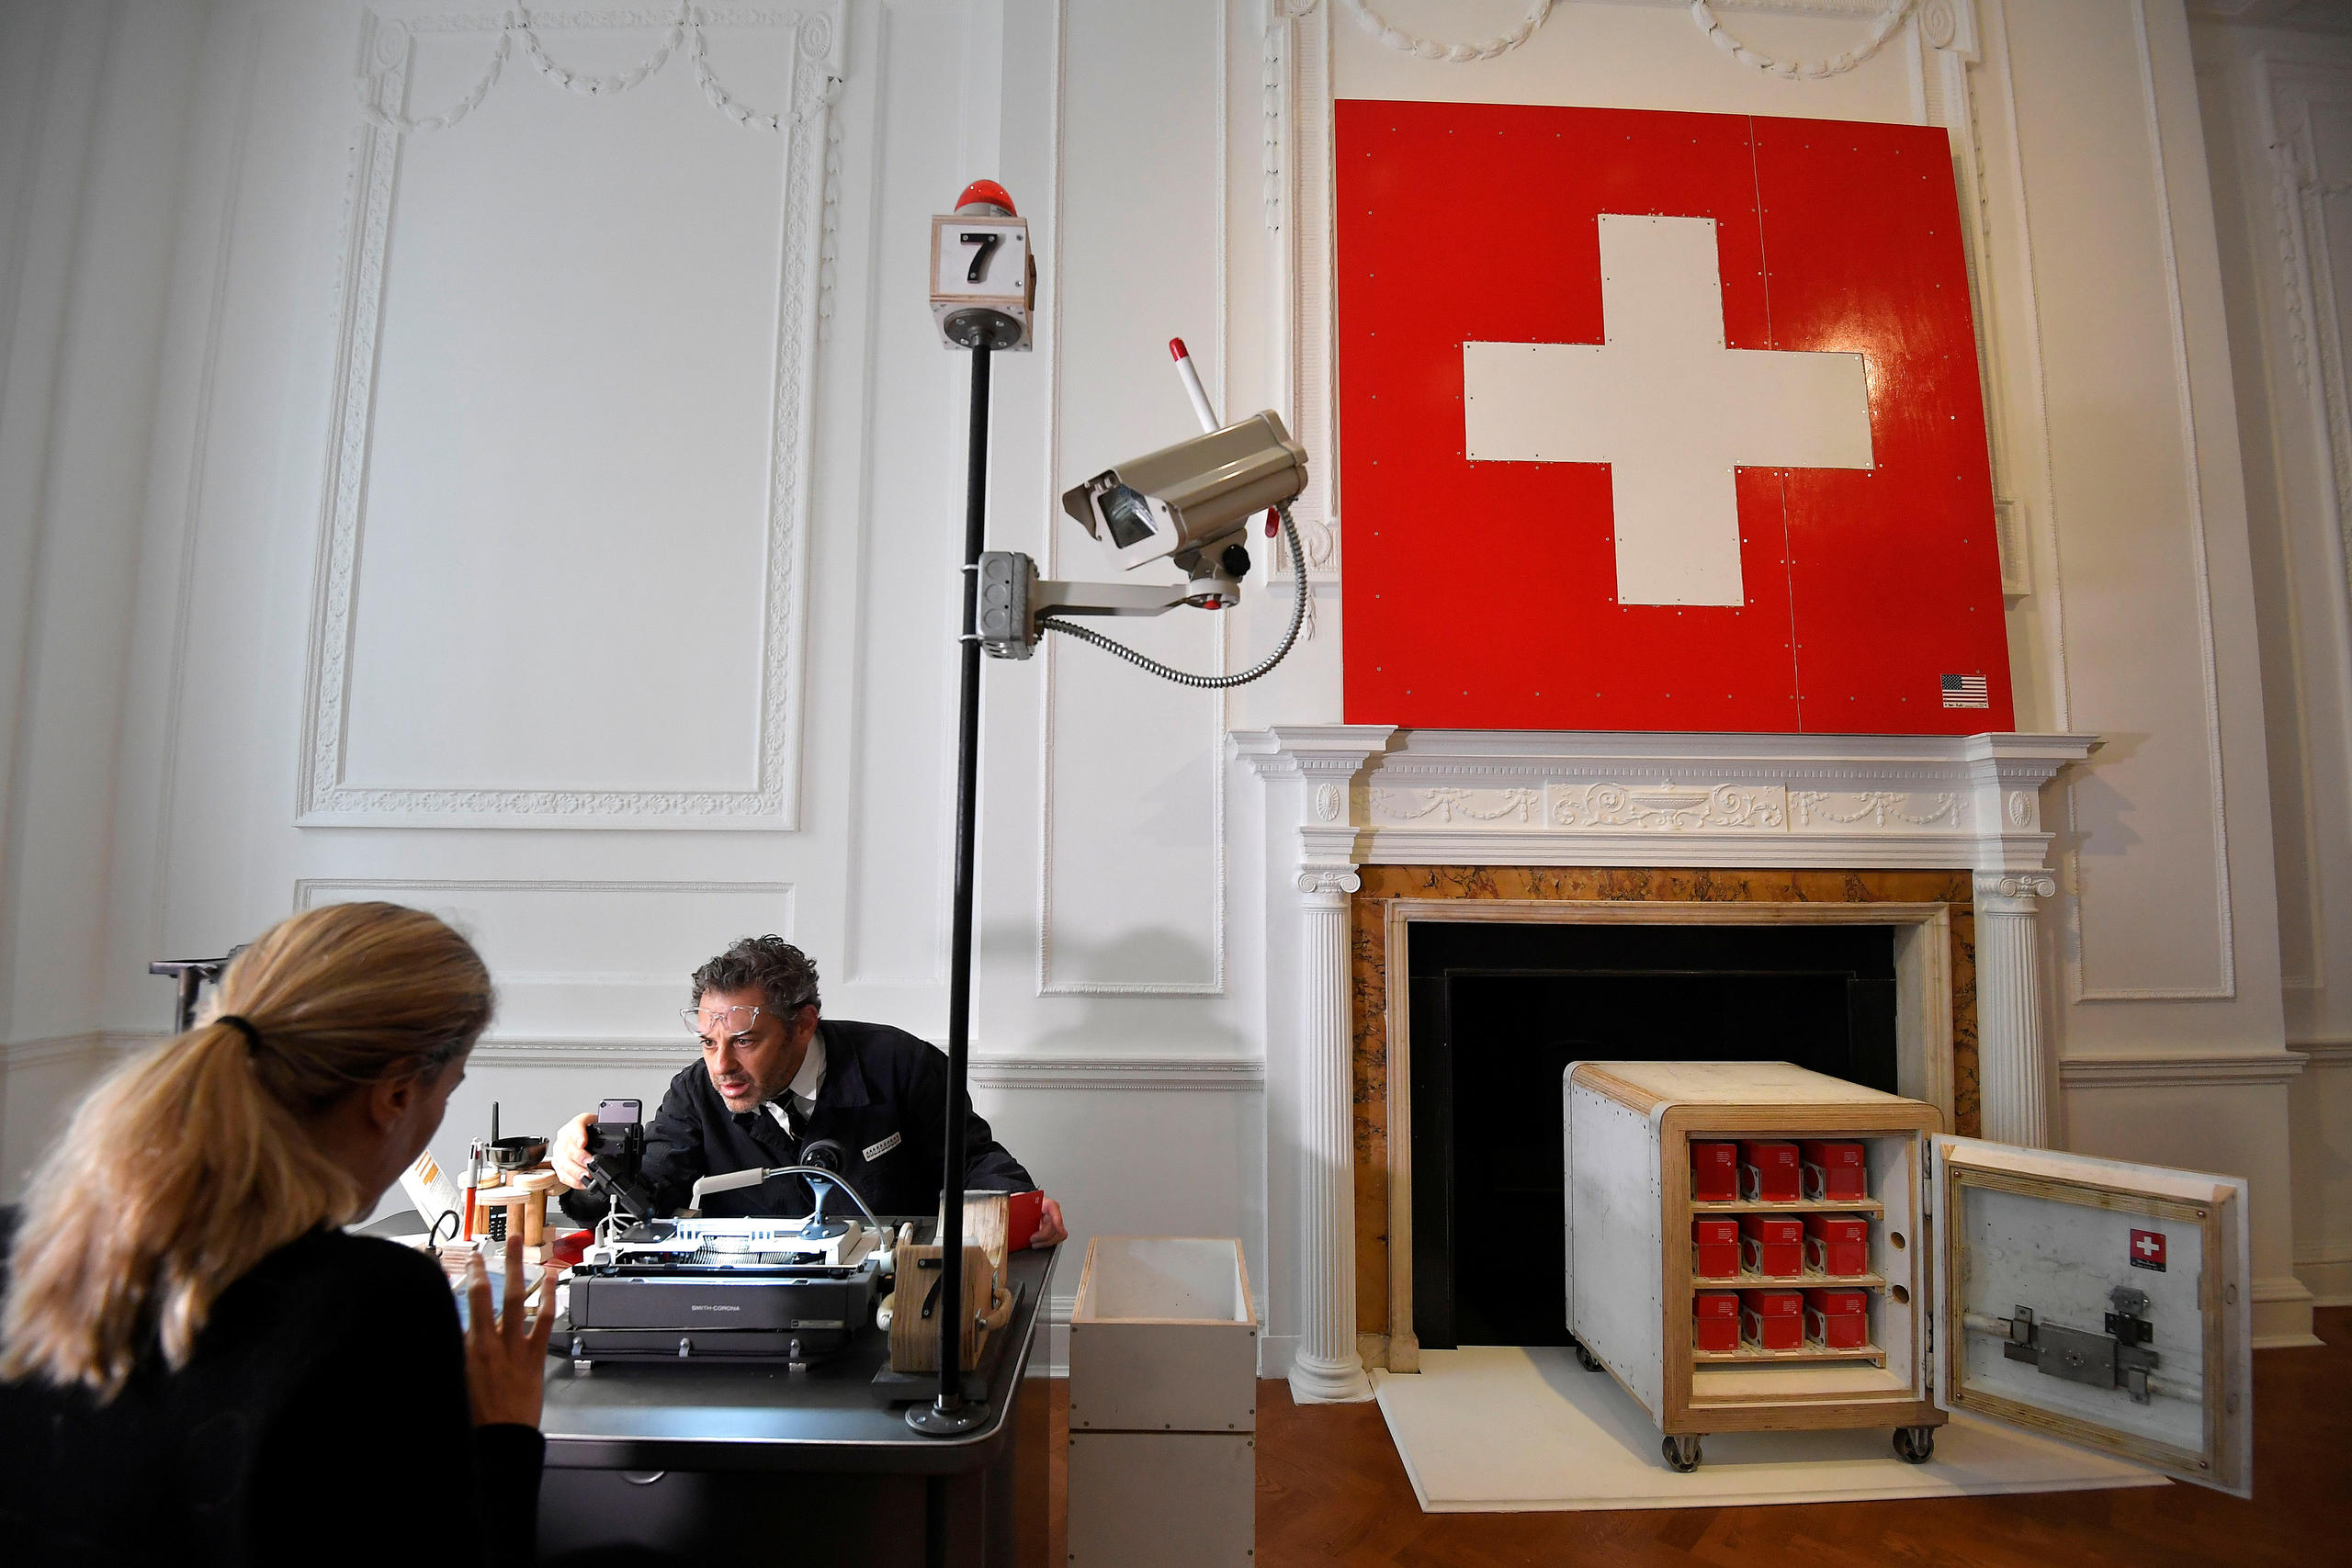 man questioning woman next to Swiss flag